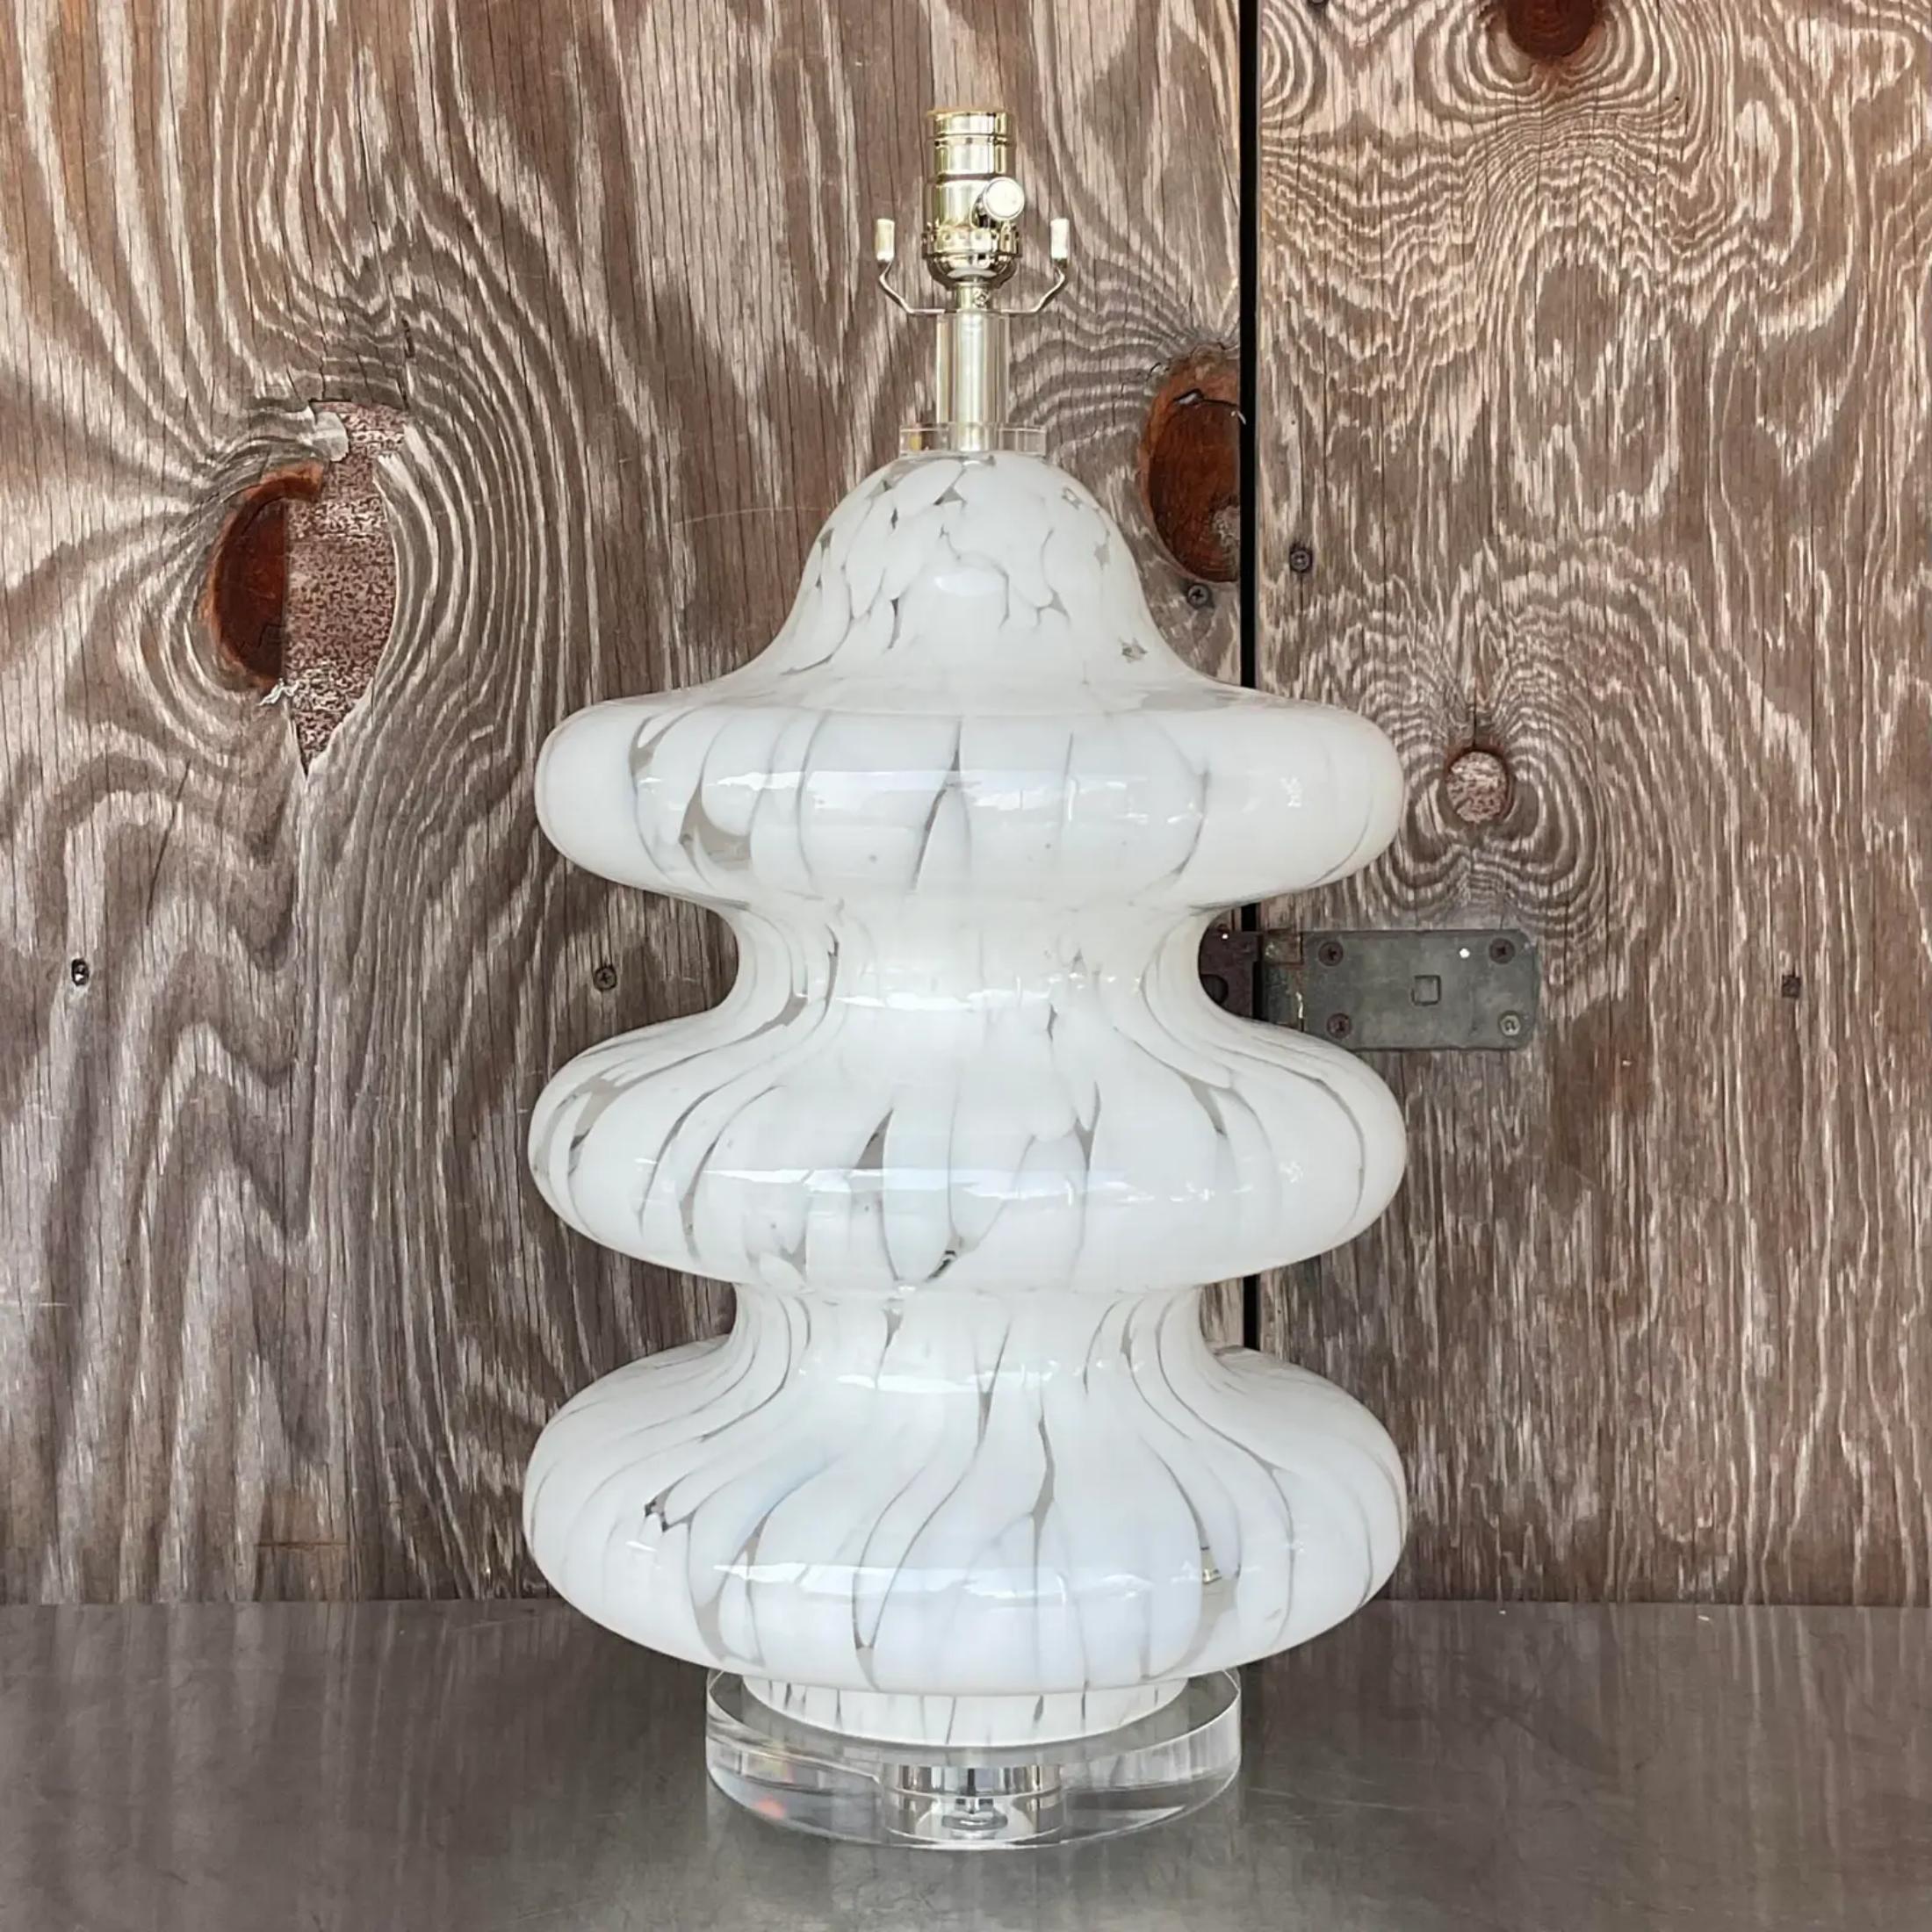 A fabulous vintage Boho table lamp. Designed by Carlo Nason for Mezzaga Murano. A chic three tier Murano glass shape on a lucite plinth. Fully restored with all new hardware and wiring.